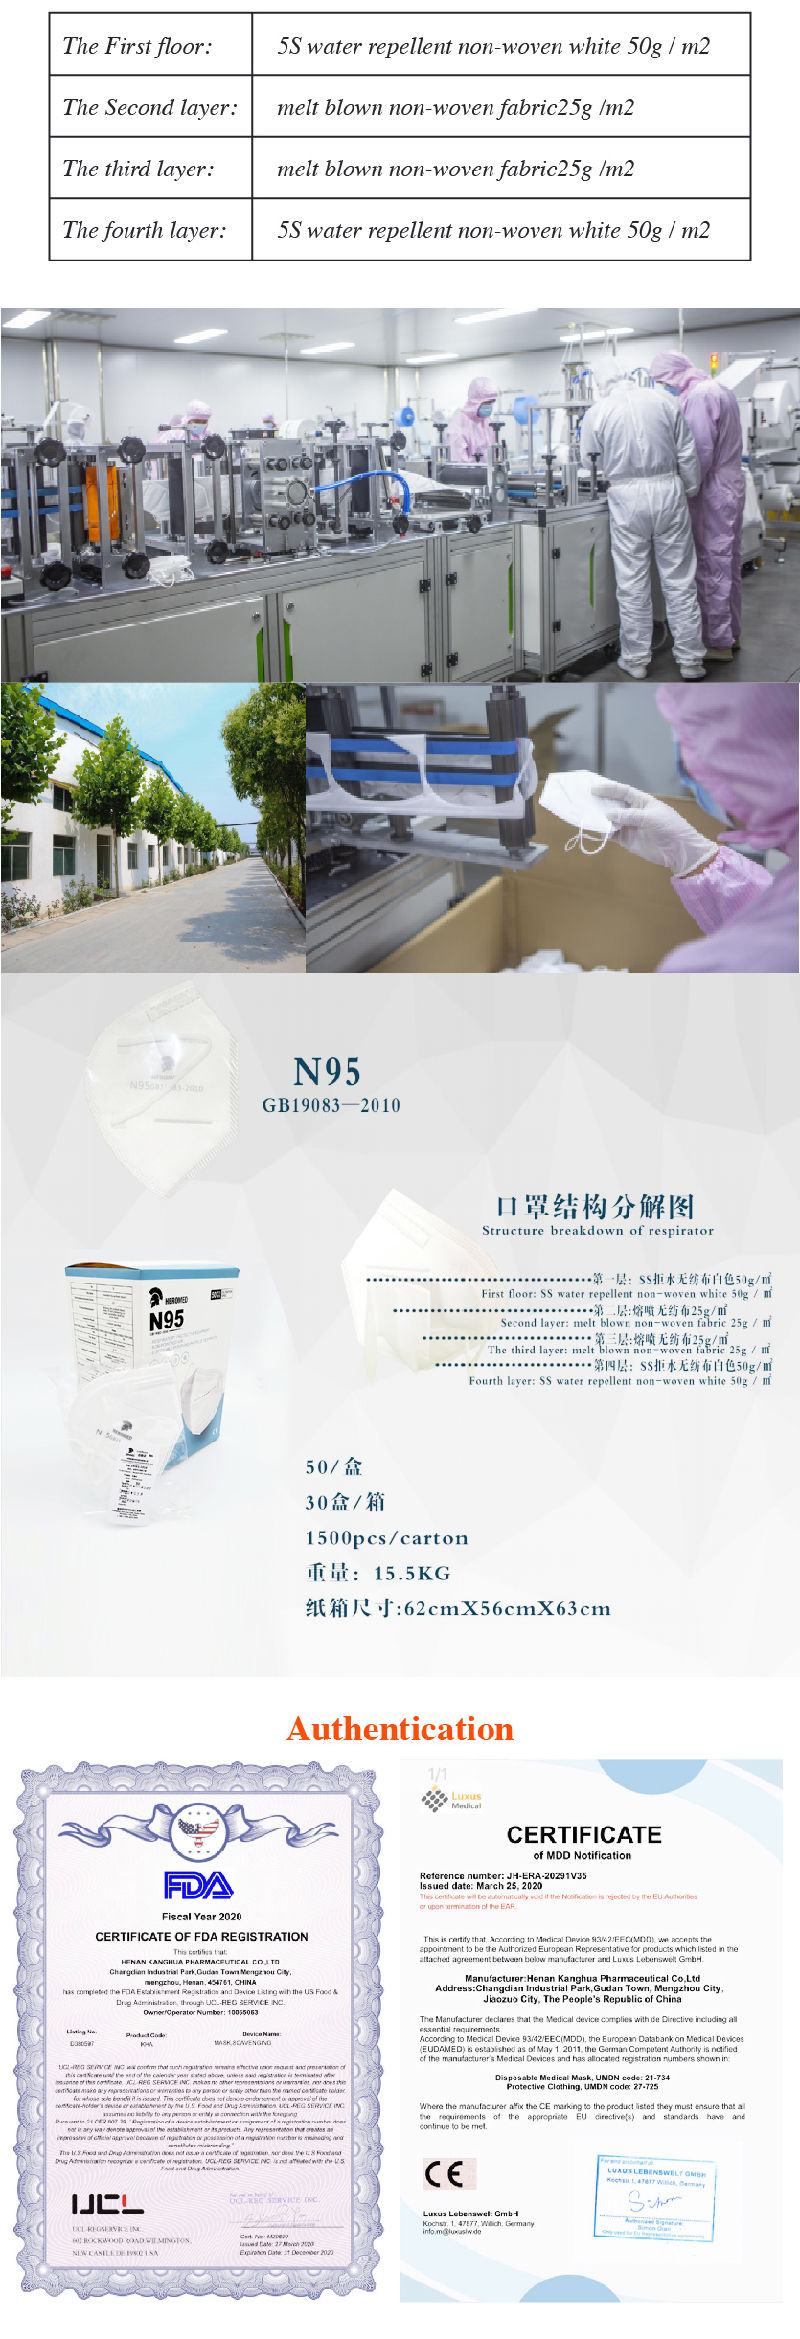 N95 Face Masks Can Be Shipped on The Same Day, High Quality Protection 